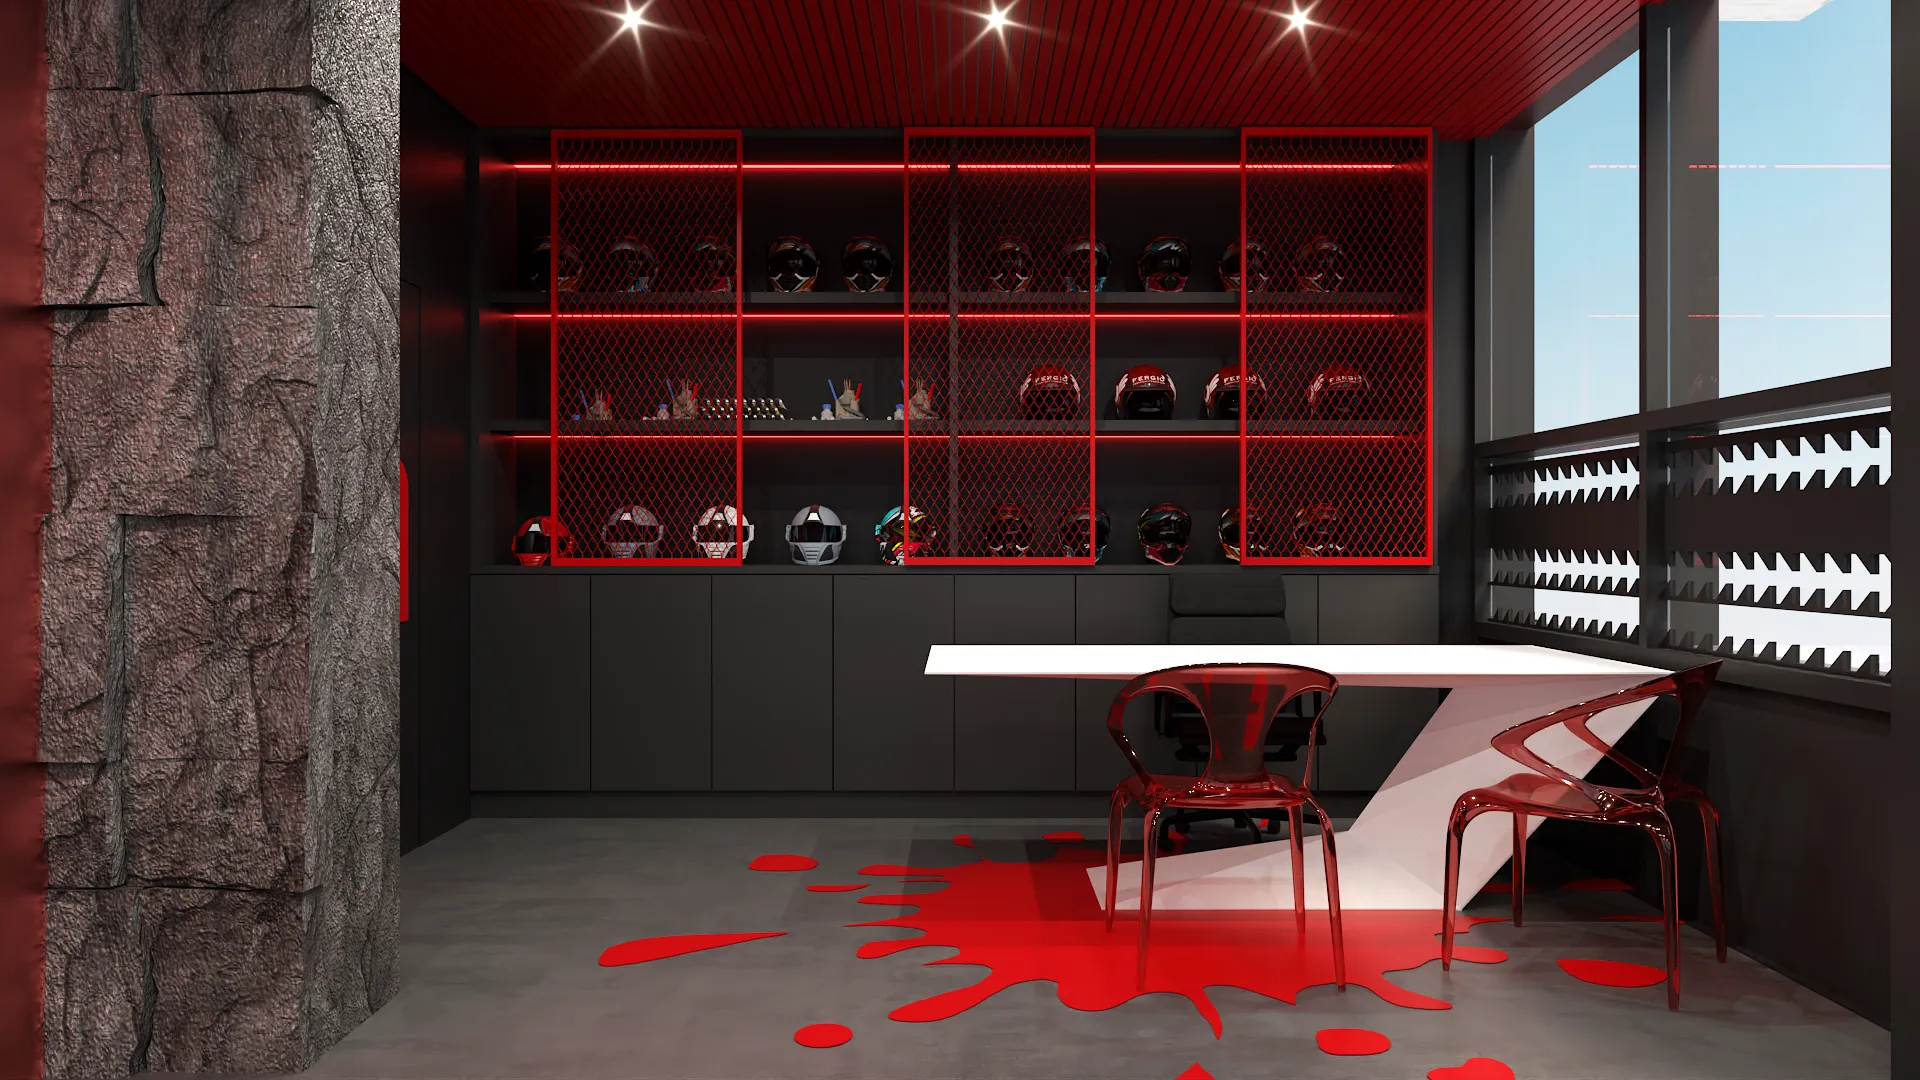 A bold office space with a red and black color scheme, showcasing modern furniture, a unique desk, and an artistic design on the floor and walls. The room is ideal for creative professionals seeking an inspiring work environment. Design by Debora, an online interior design service.